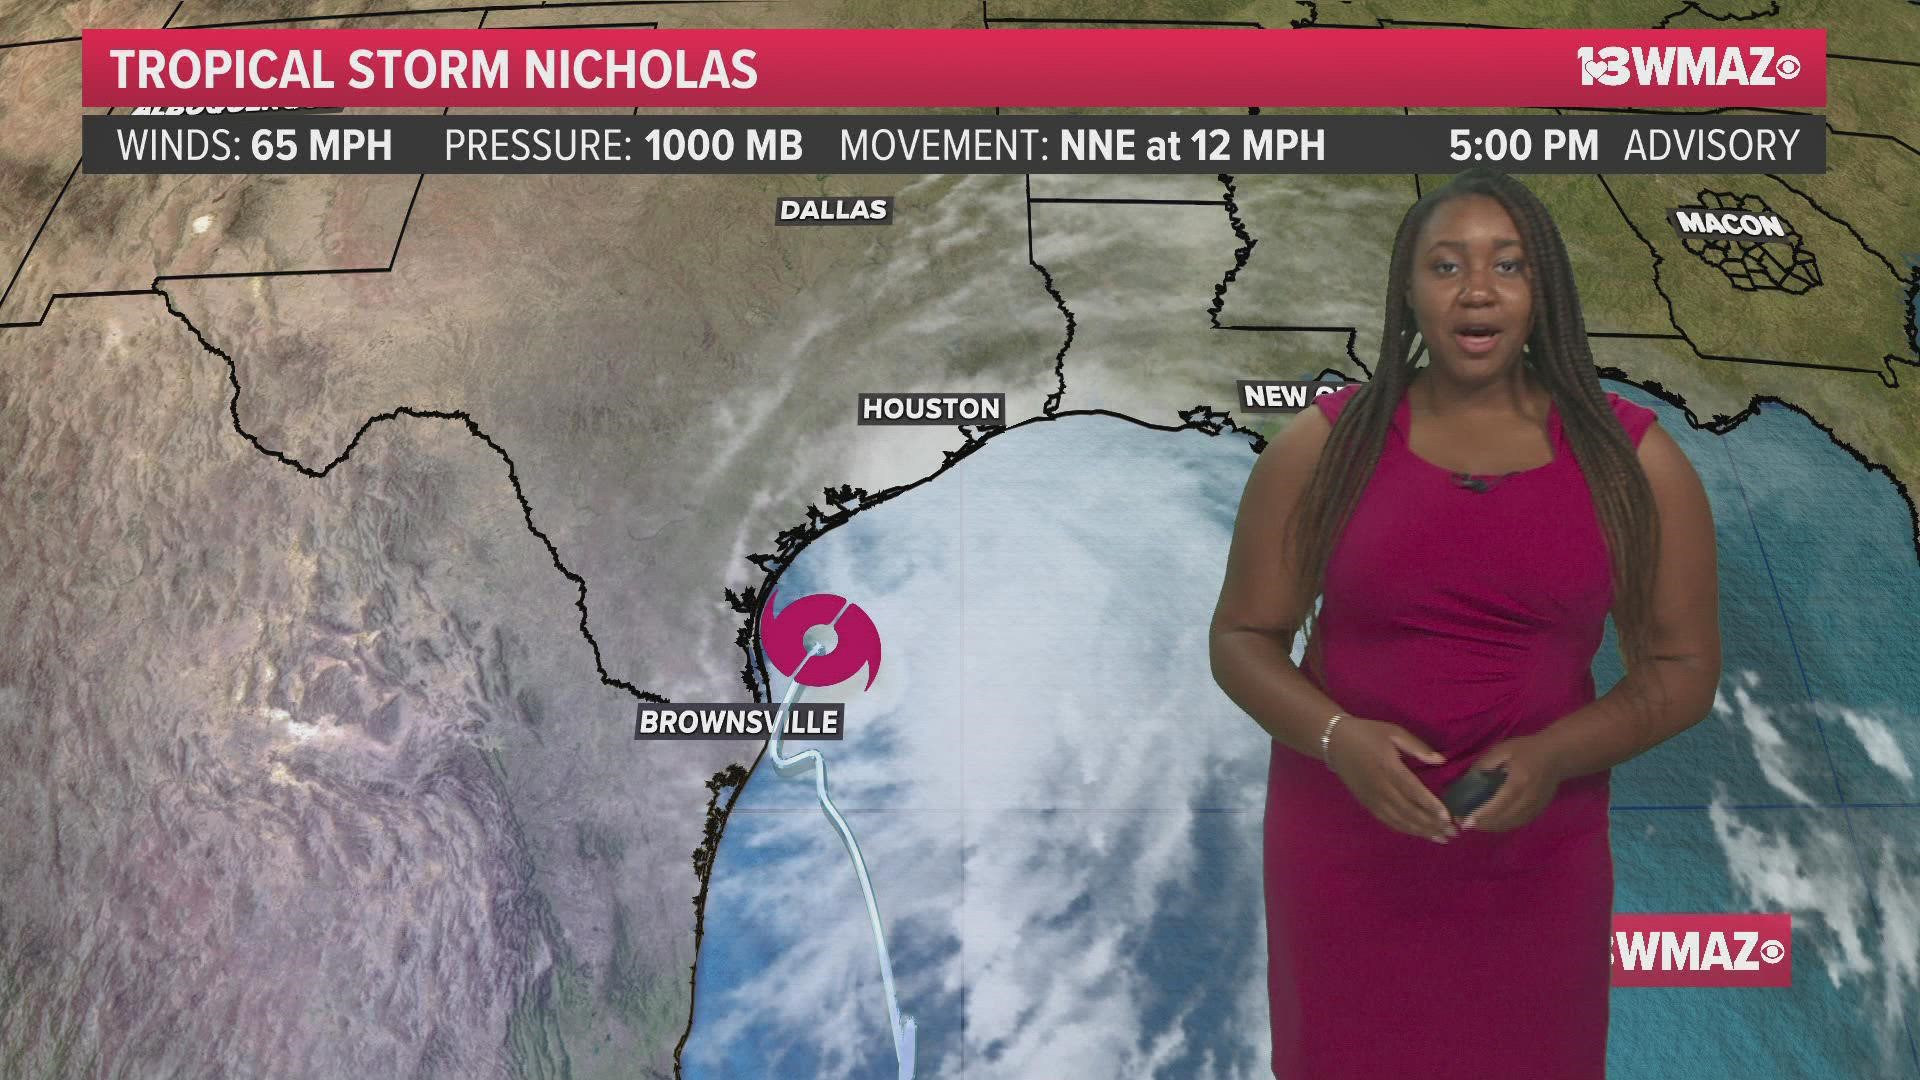 Tropical Storm Nicholas is set to make landfall soon near Houston, Texas. Central Georgia could see some rain from the remnants of Nicholas.